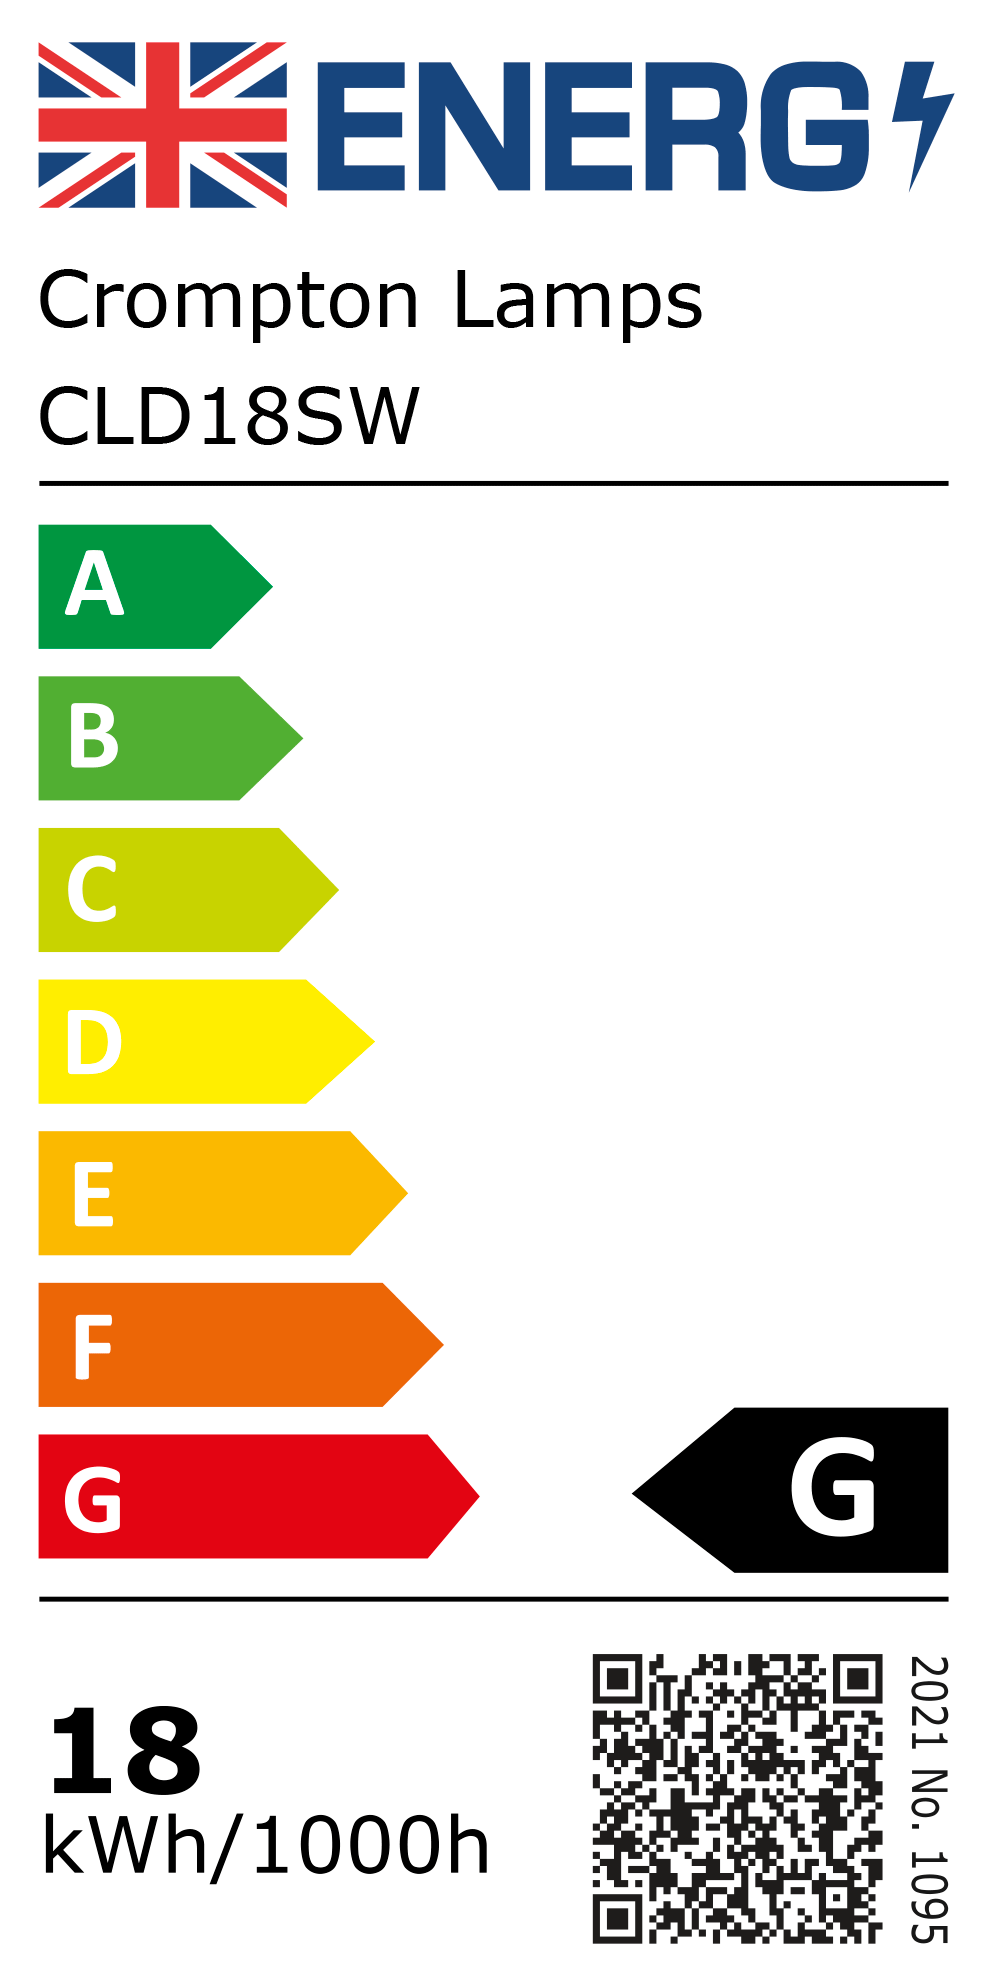 New 2021 Energy Rating Label: Stock Code CLD18SW